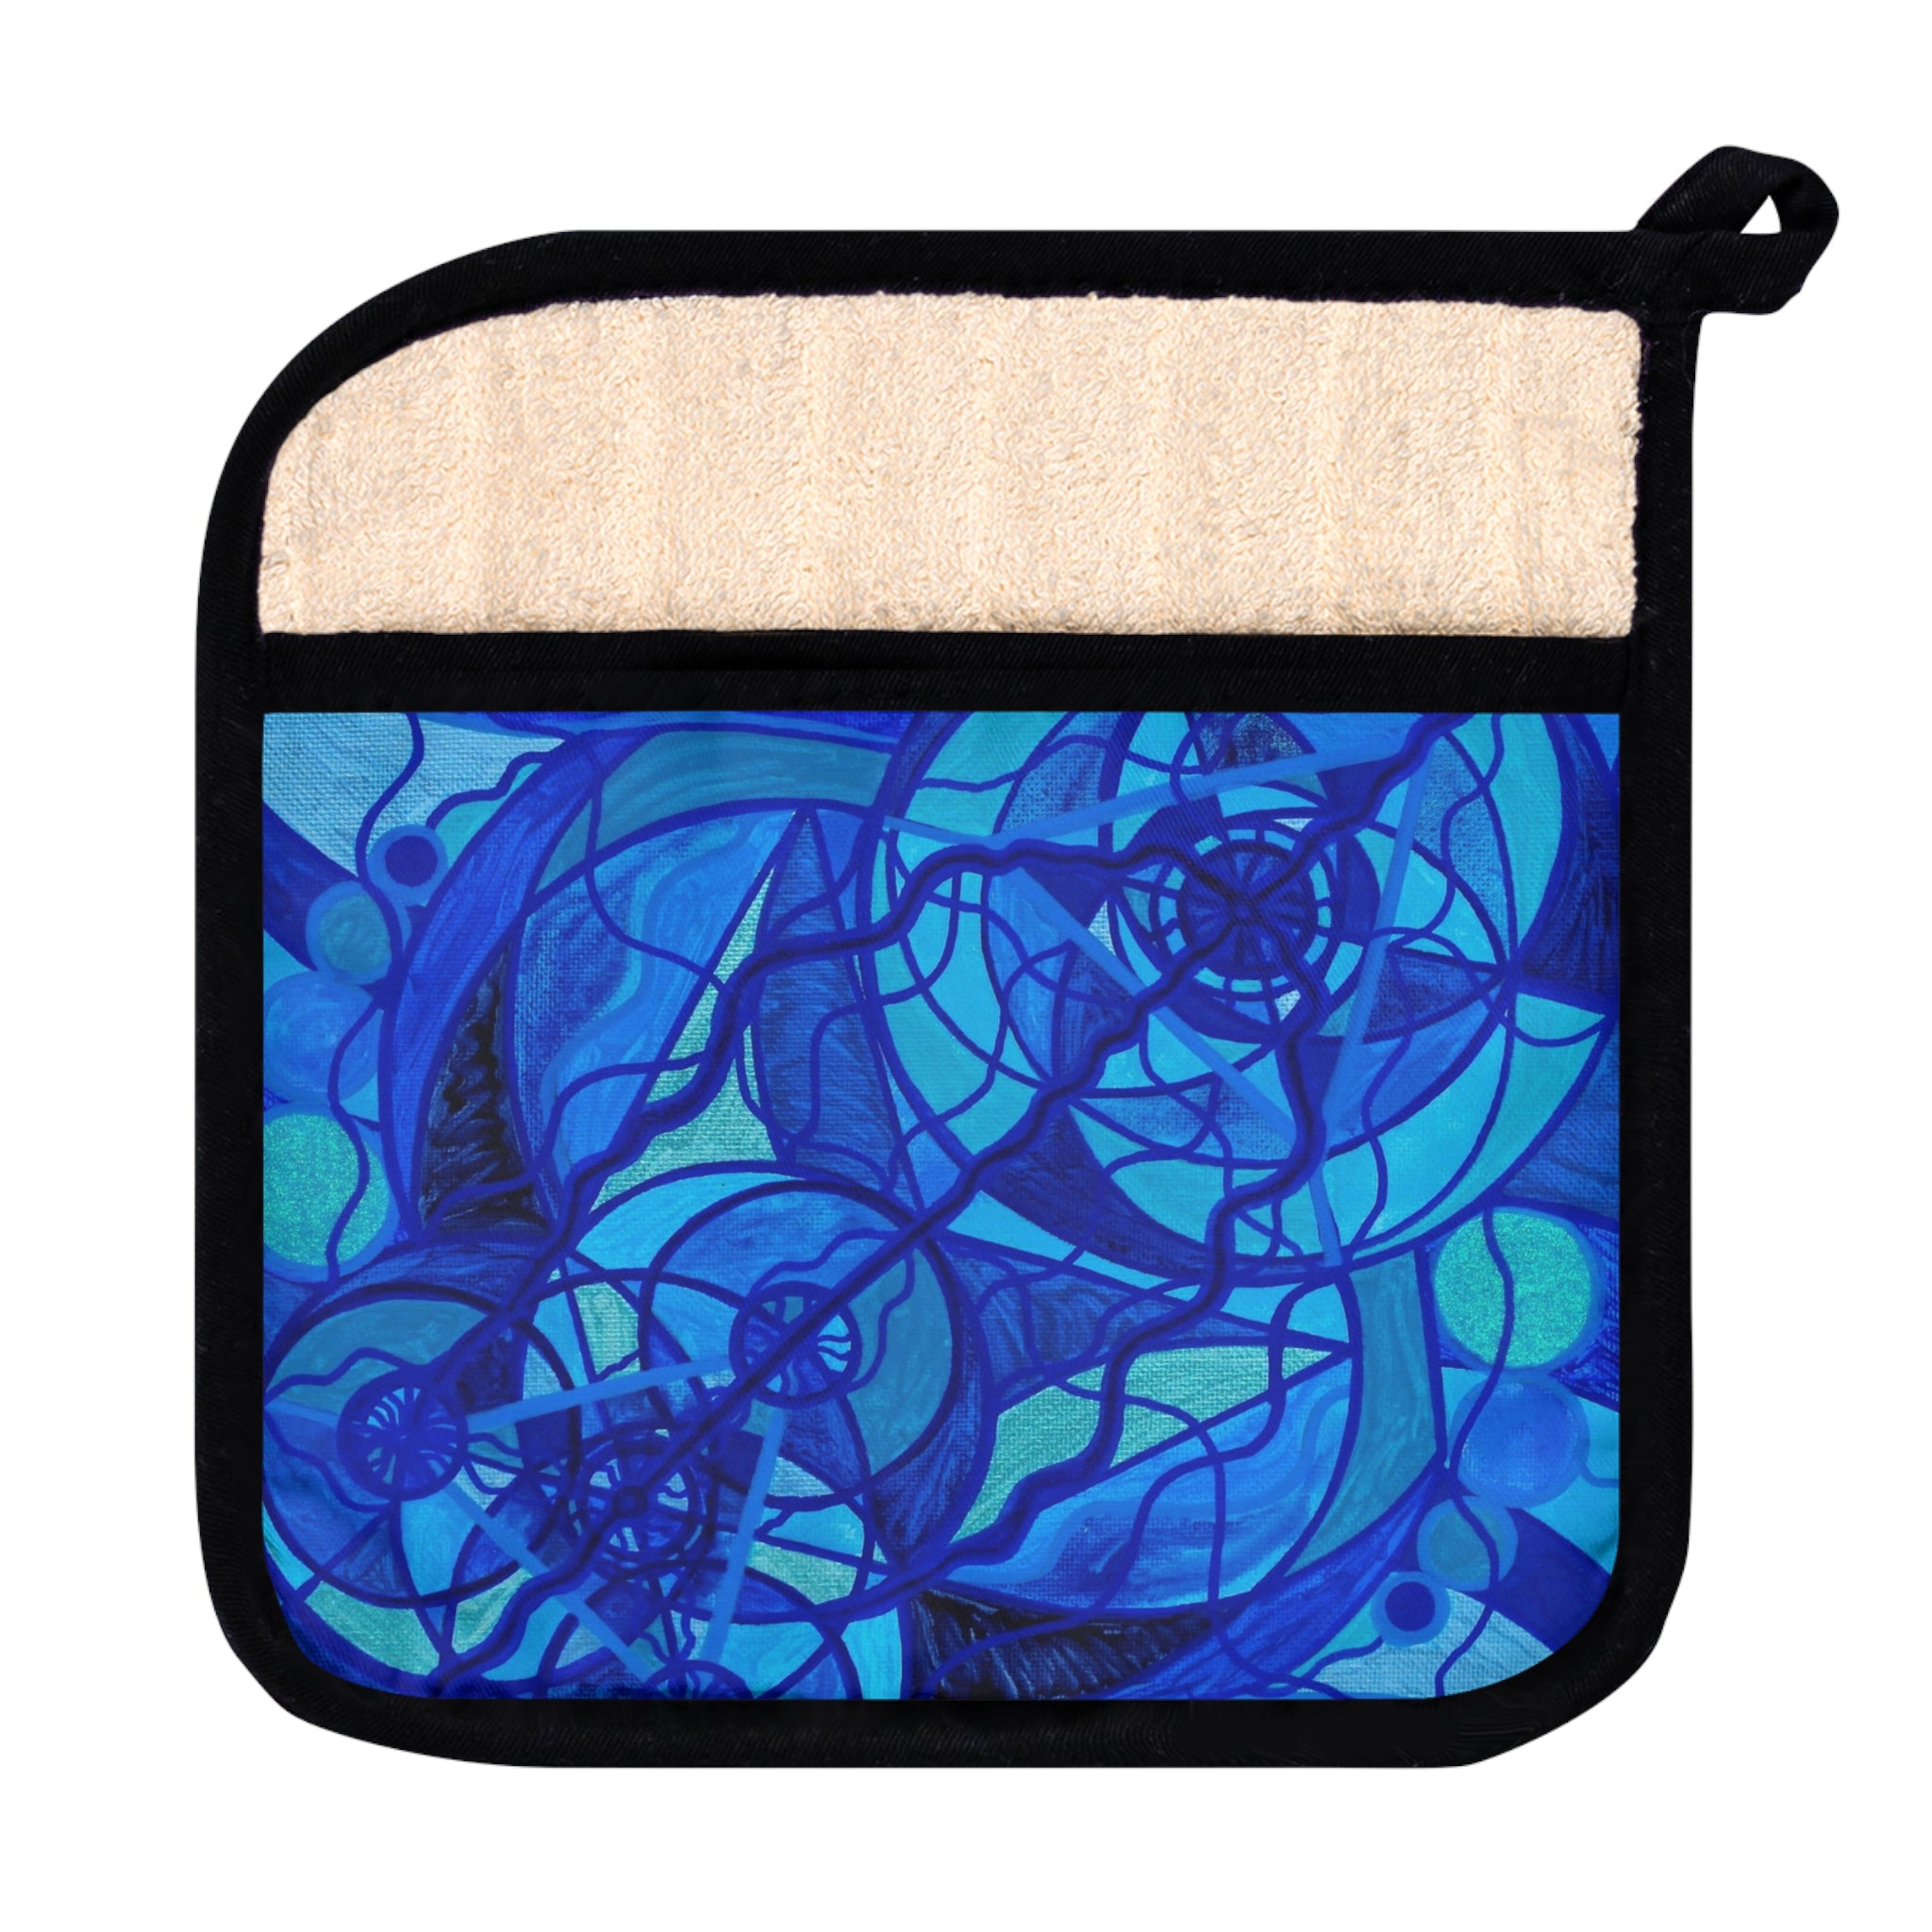 get-the-newest-arcturian-calming-grid-pot-holder-with-pocket-discount_1.jpg